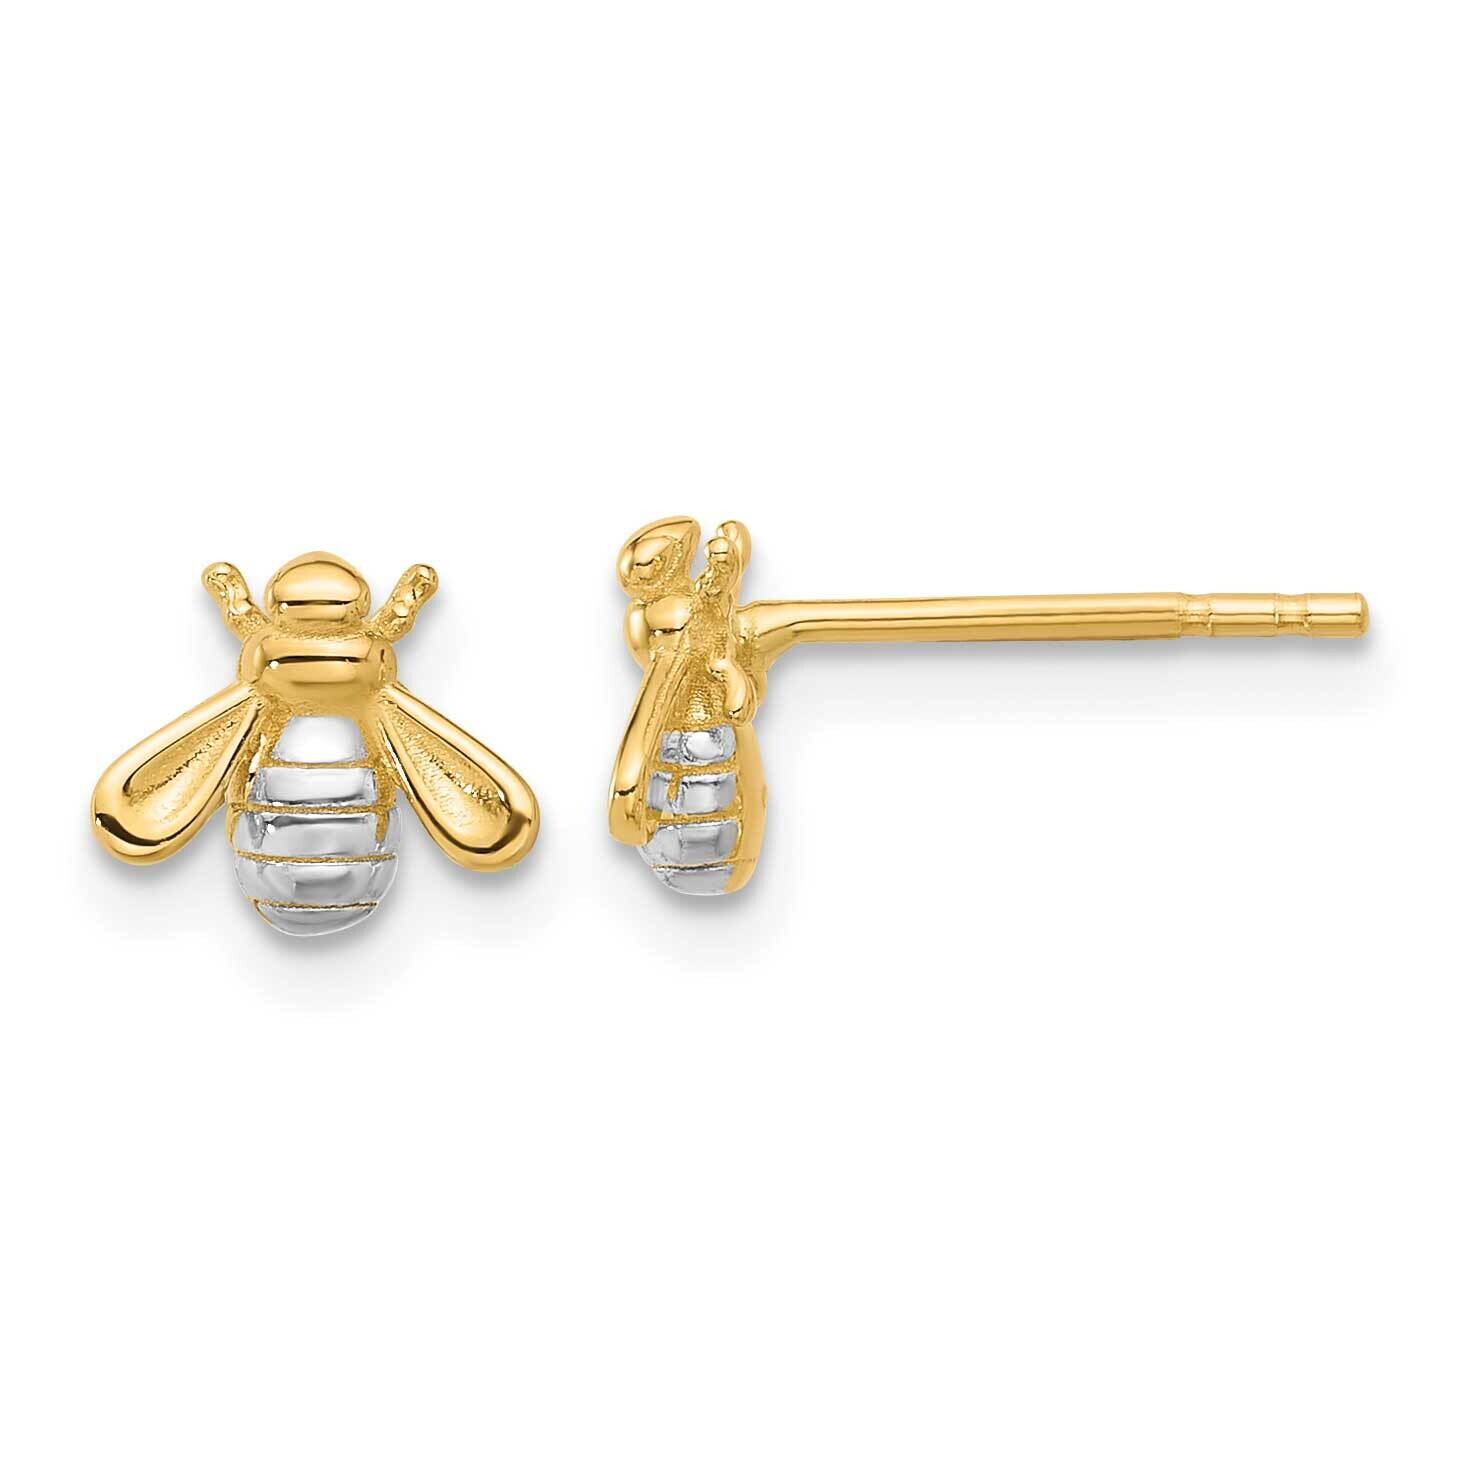 Polished Bee Post Earrings 14k Gold White Rhodium TF2369